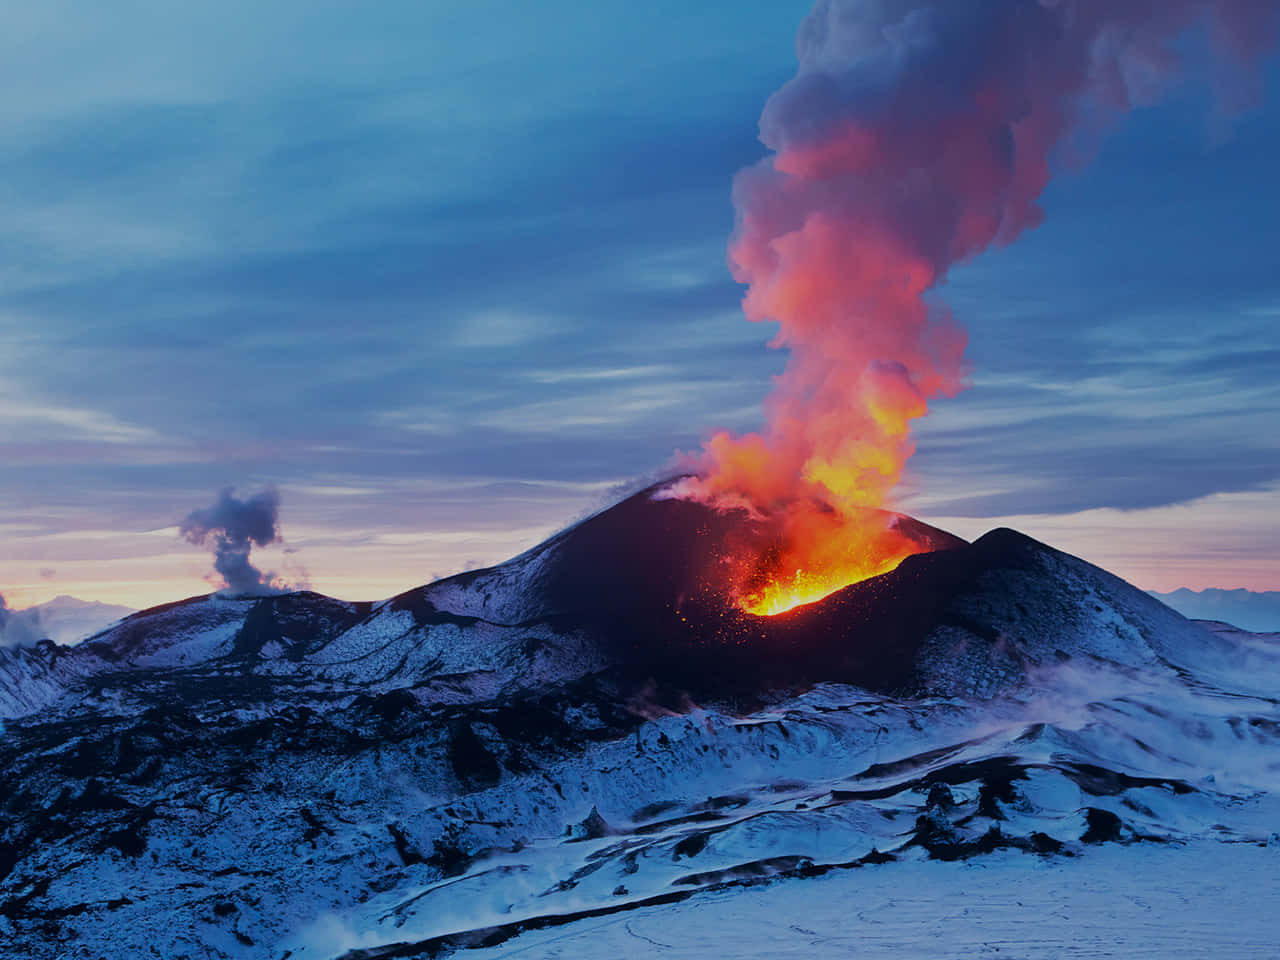 A majestic view of the natural beauty of an active Volcano